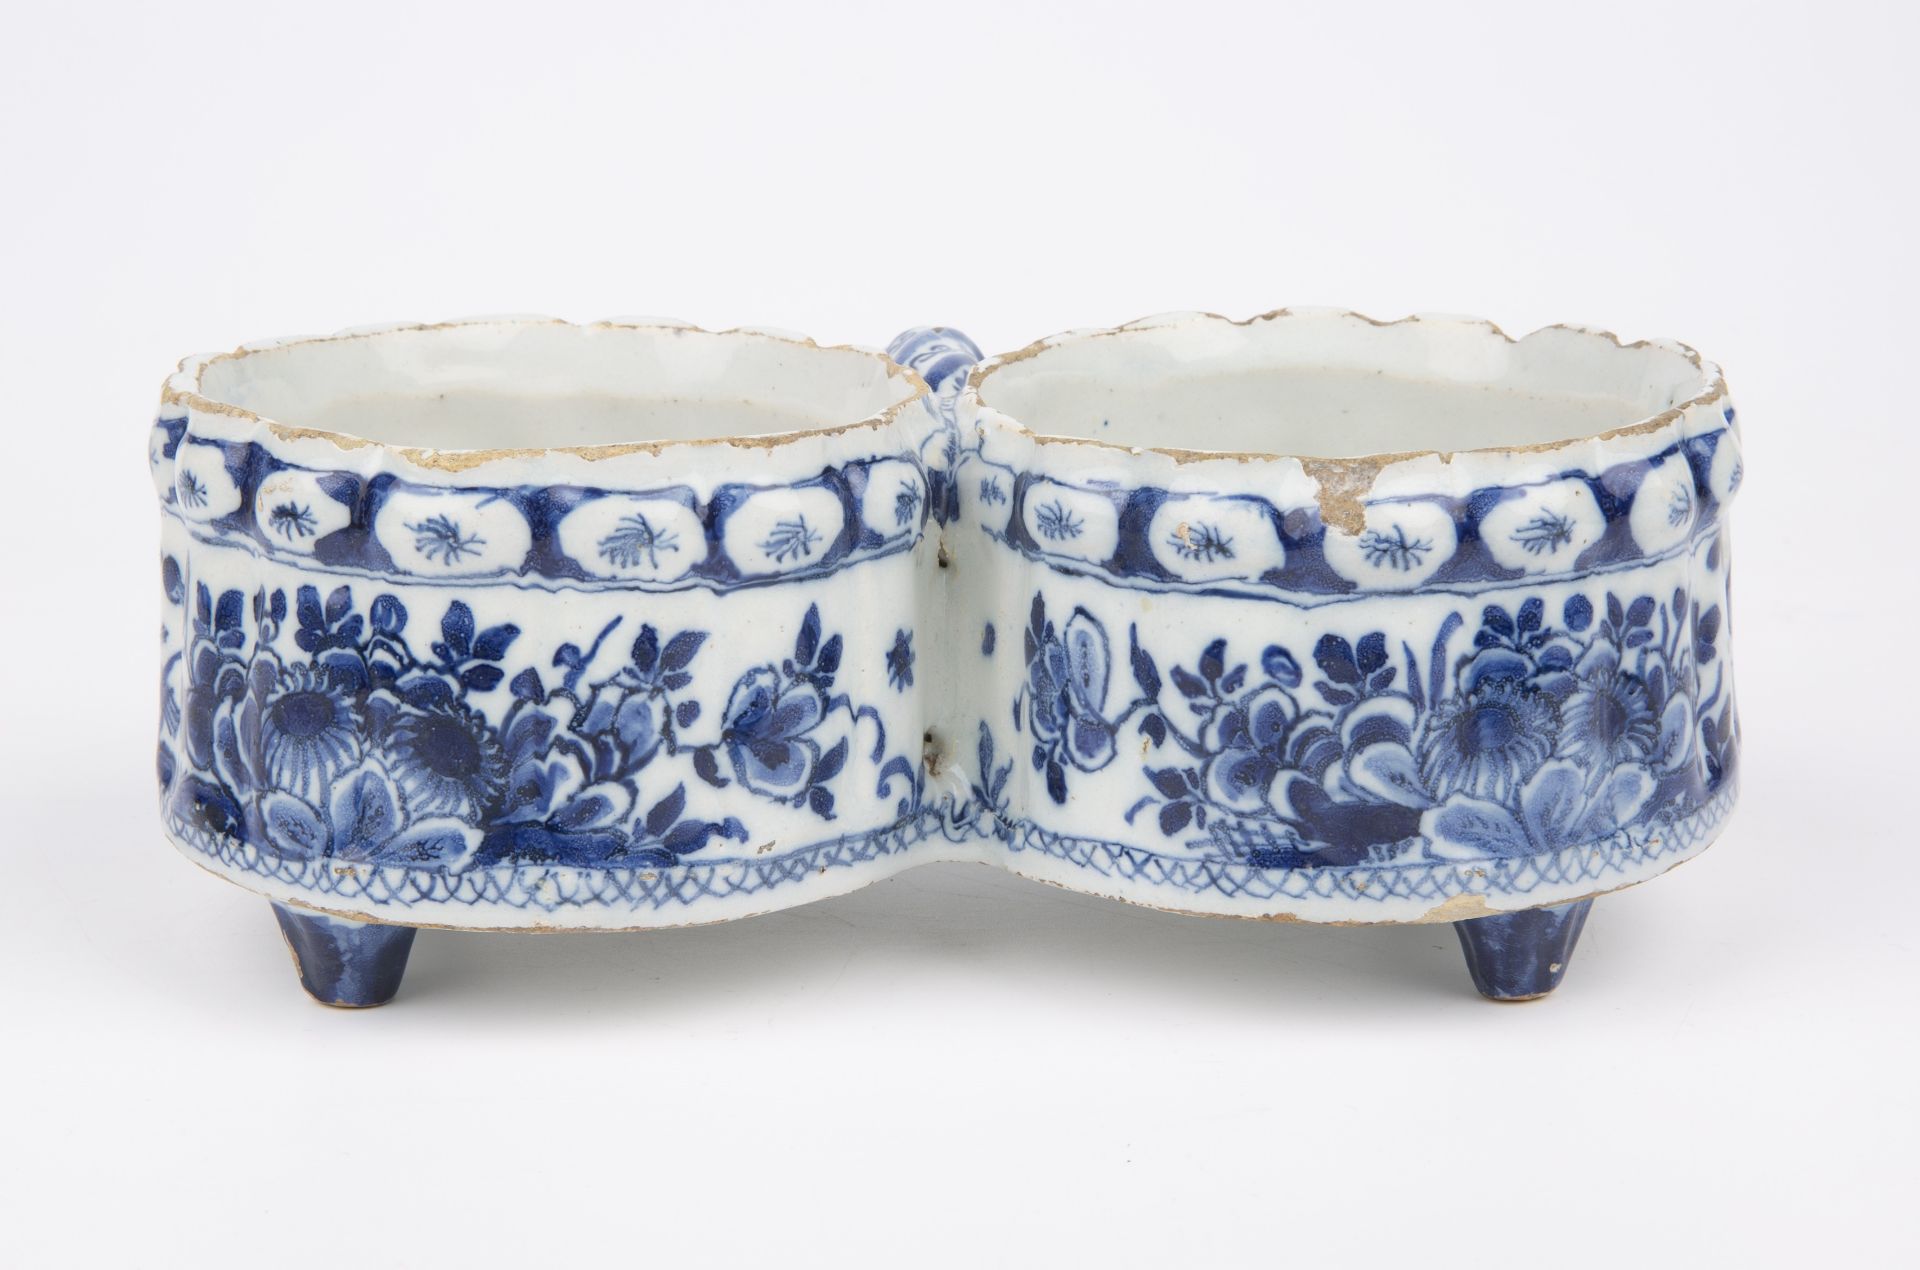 An early 18th century Delft cruet cira 1720, 19.5cm wide 7cm high Good with glaze chips - Image 4 of 6